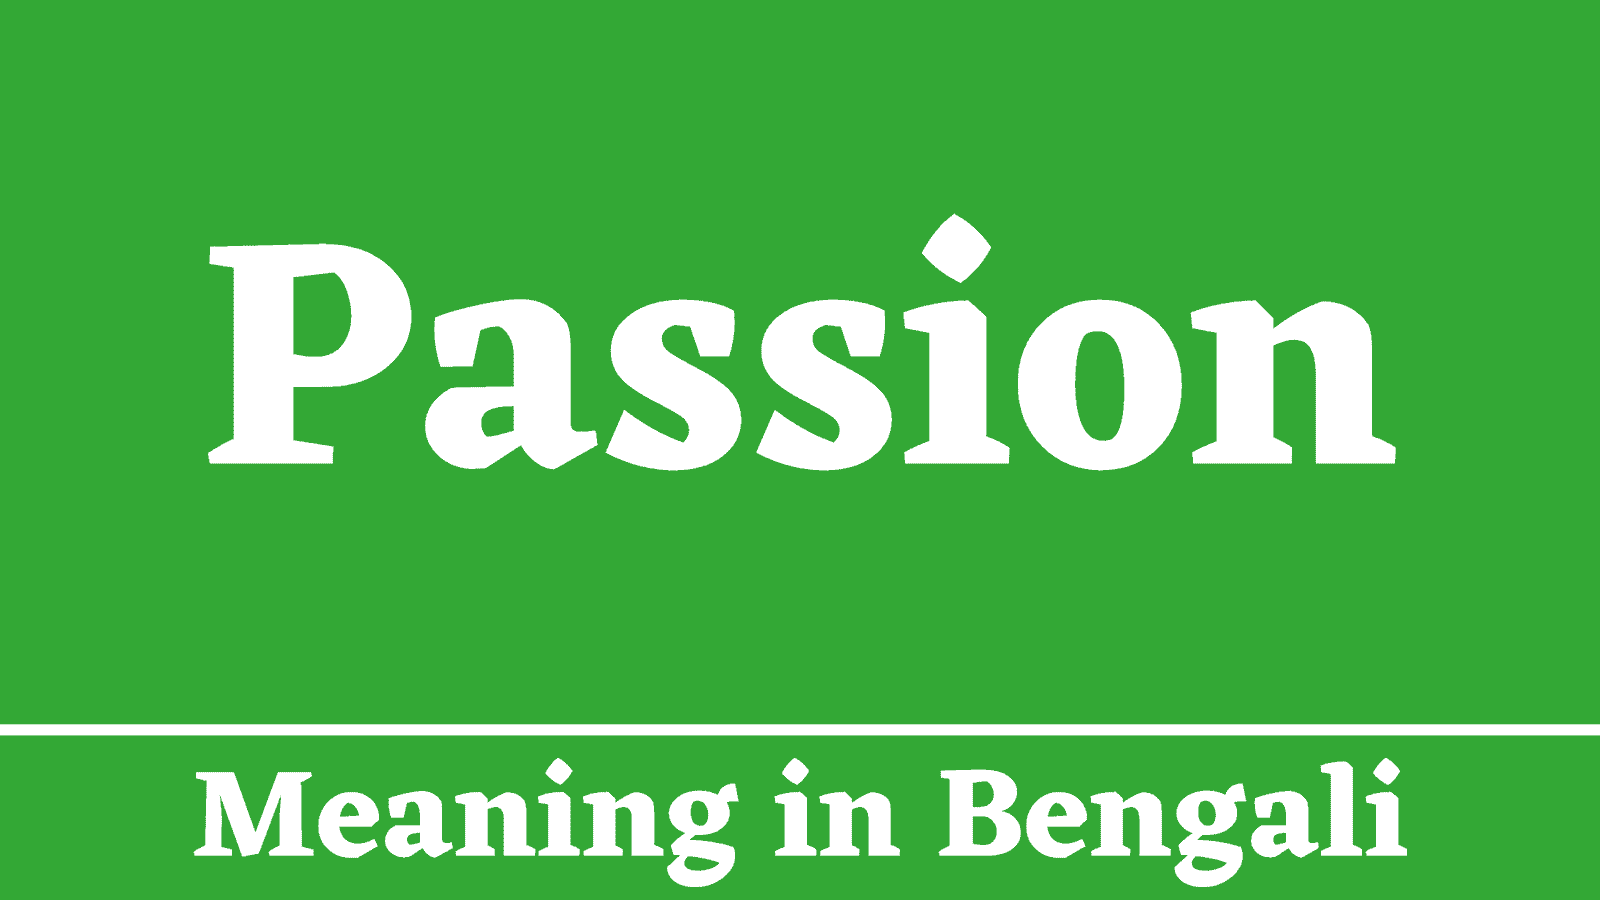 Passion Meaning in Bengali